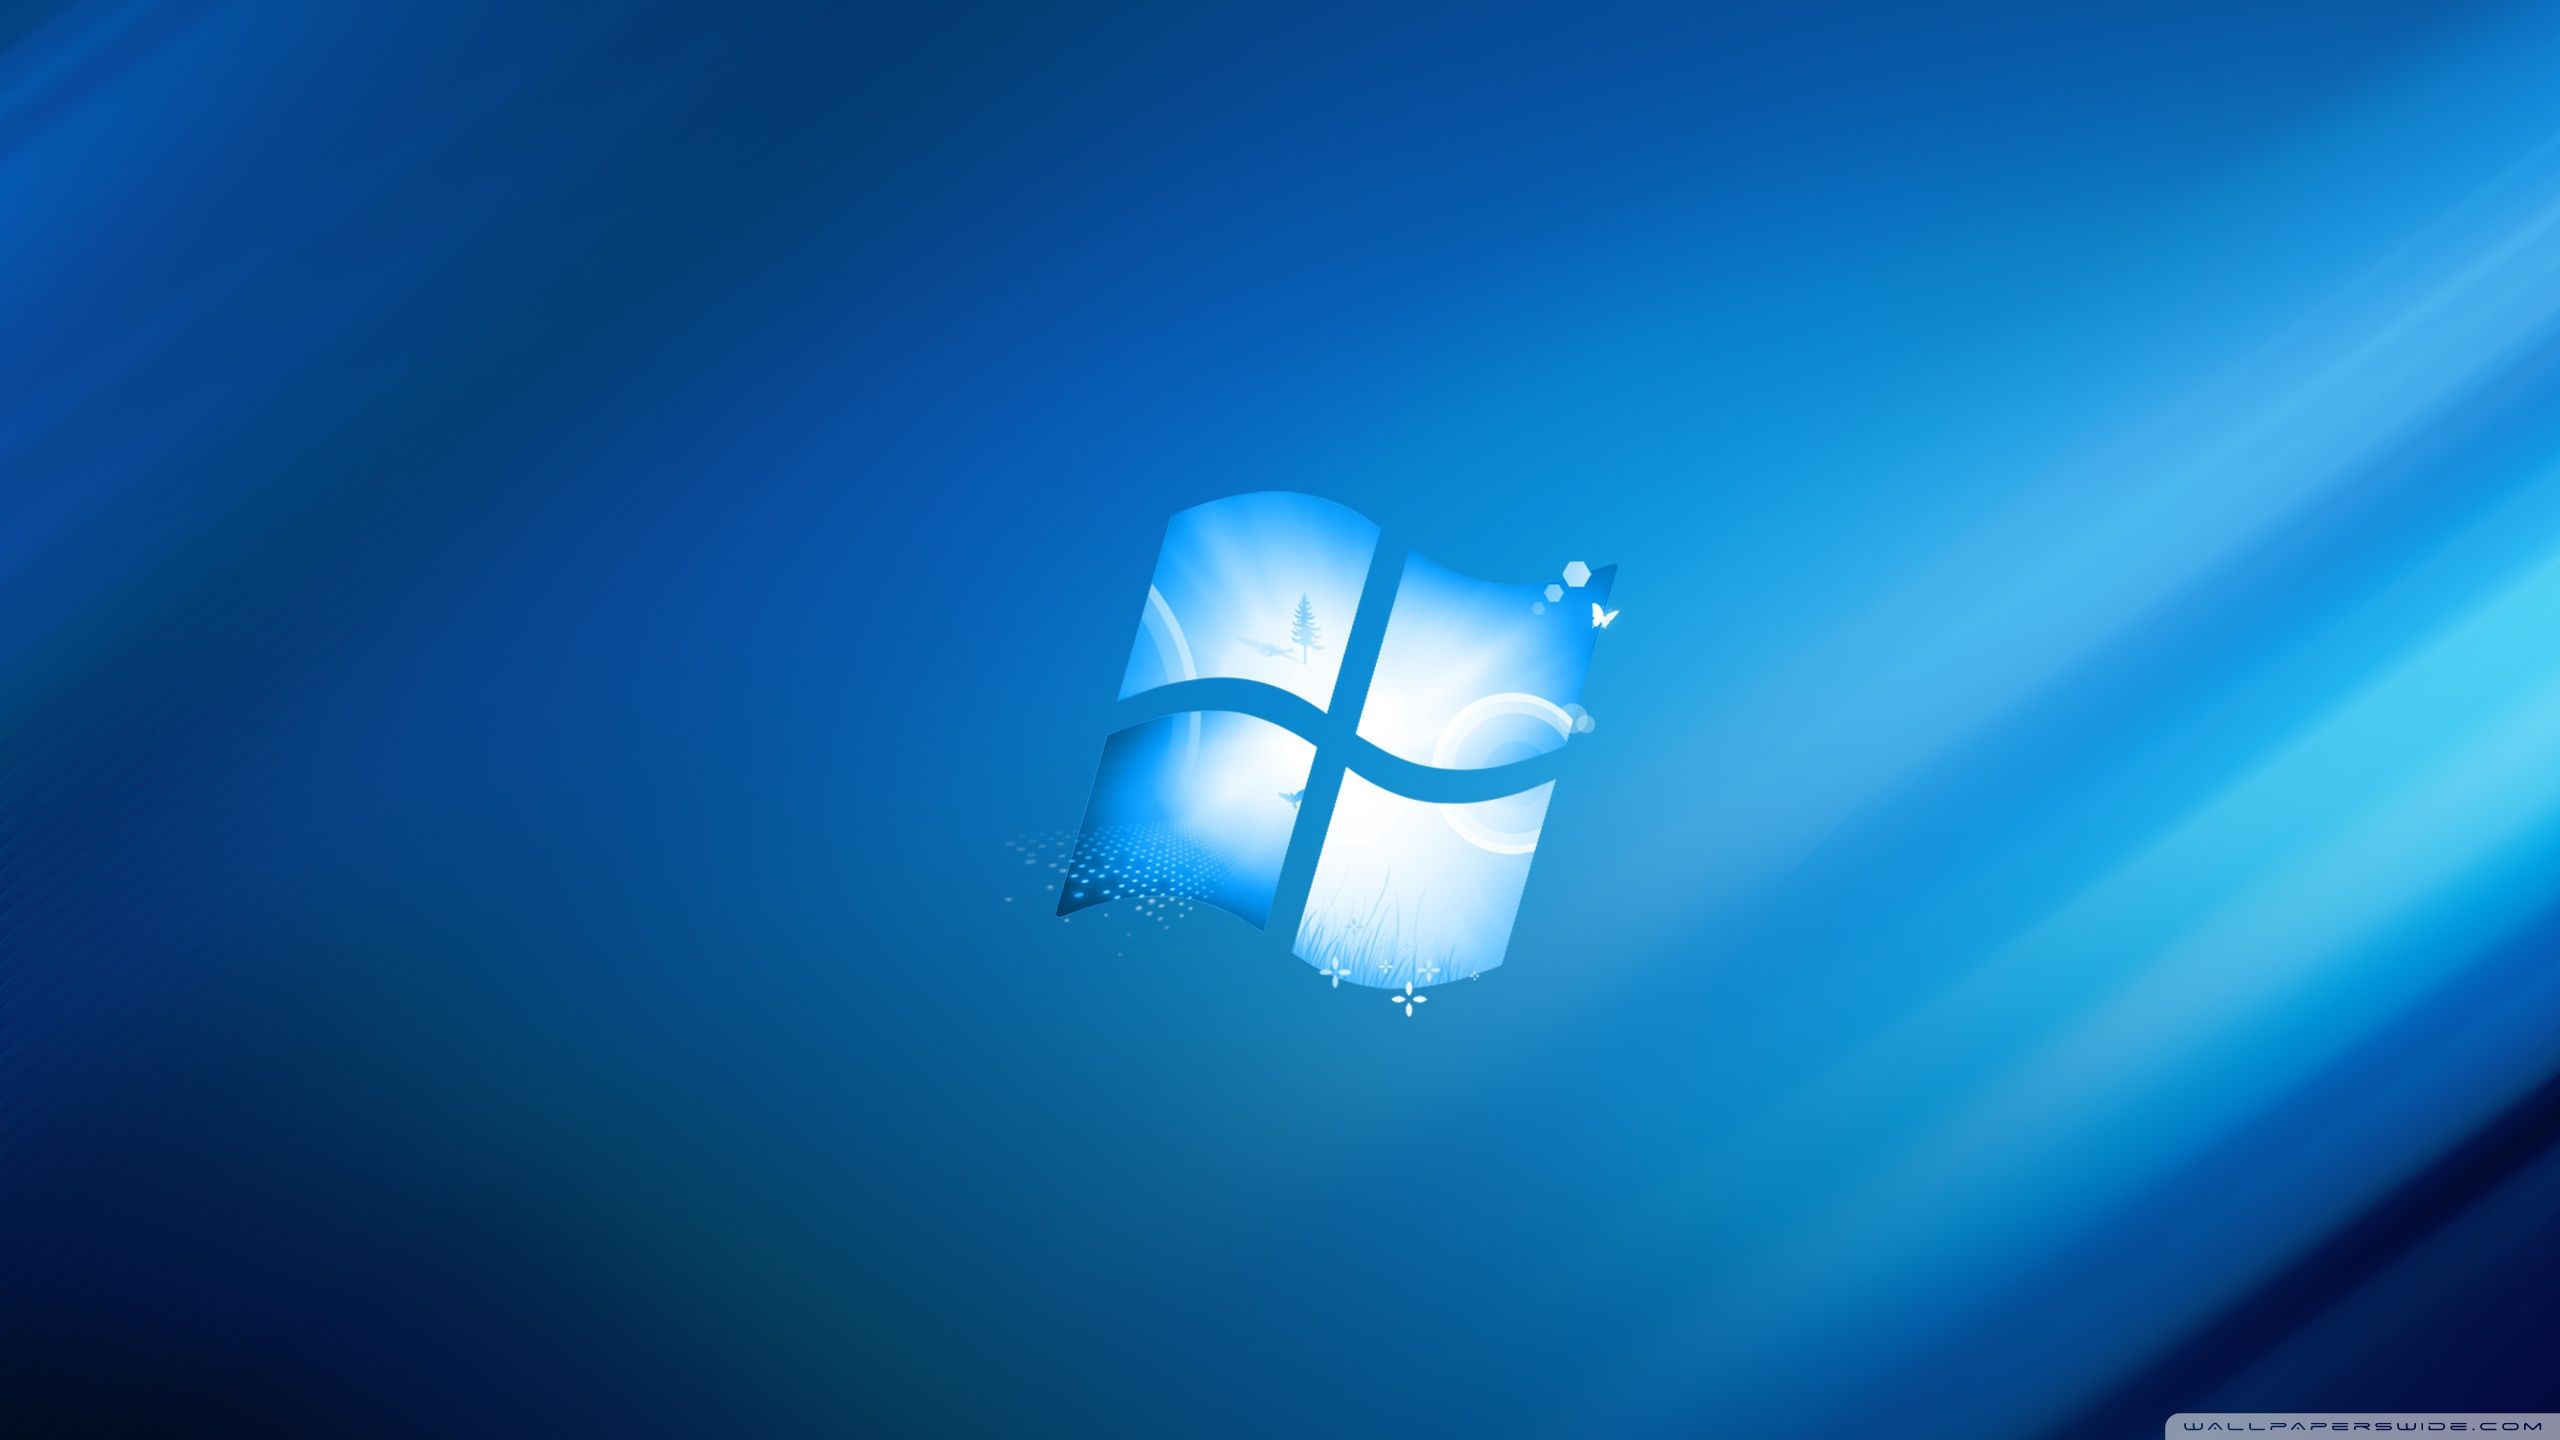 Windows 8 Blue Theme Wallpapers And Images - Wallpapers, Pictures